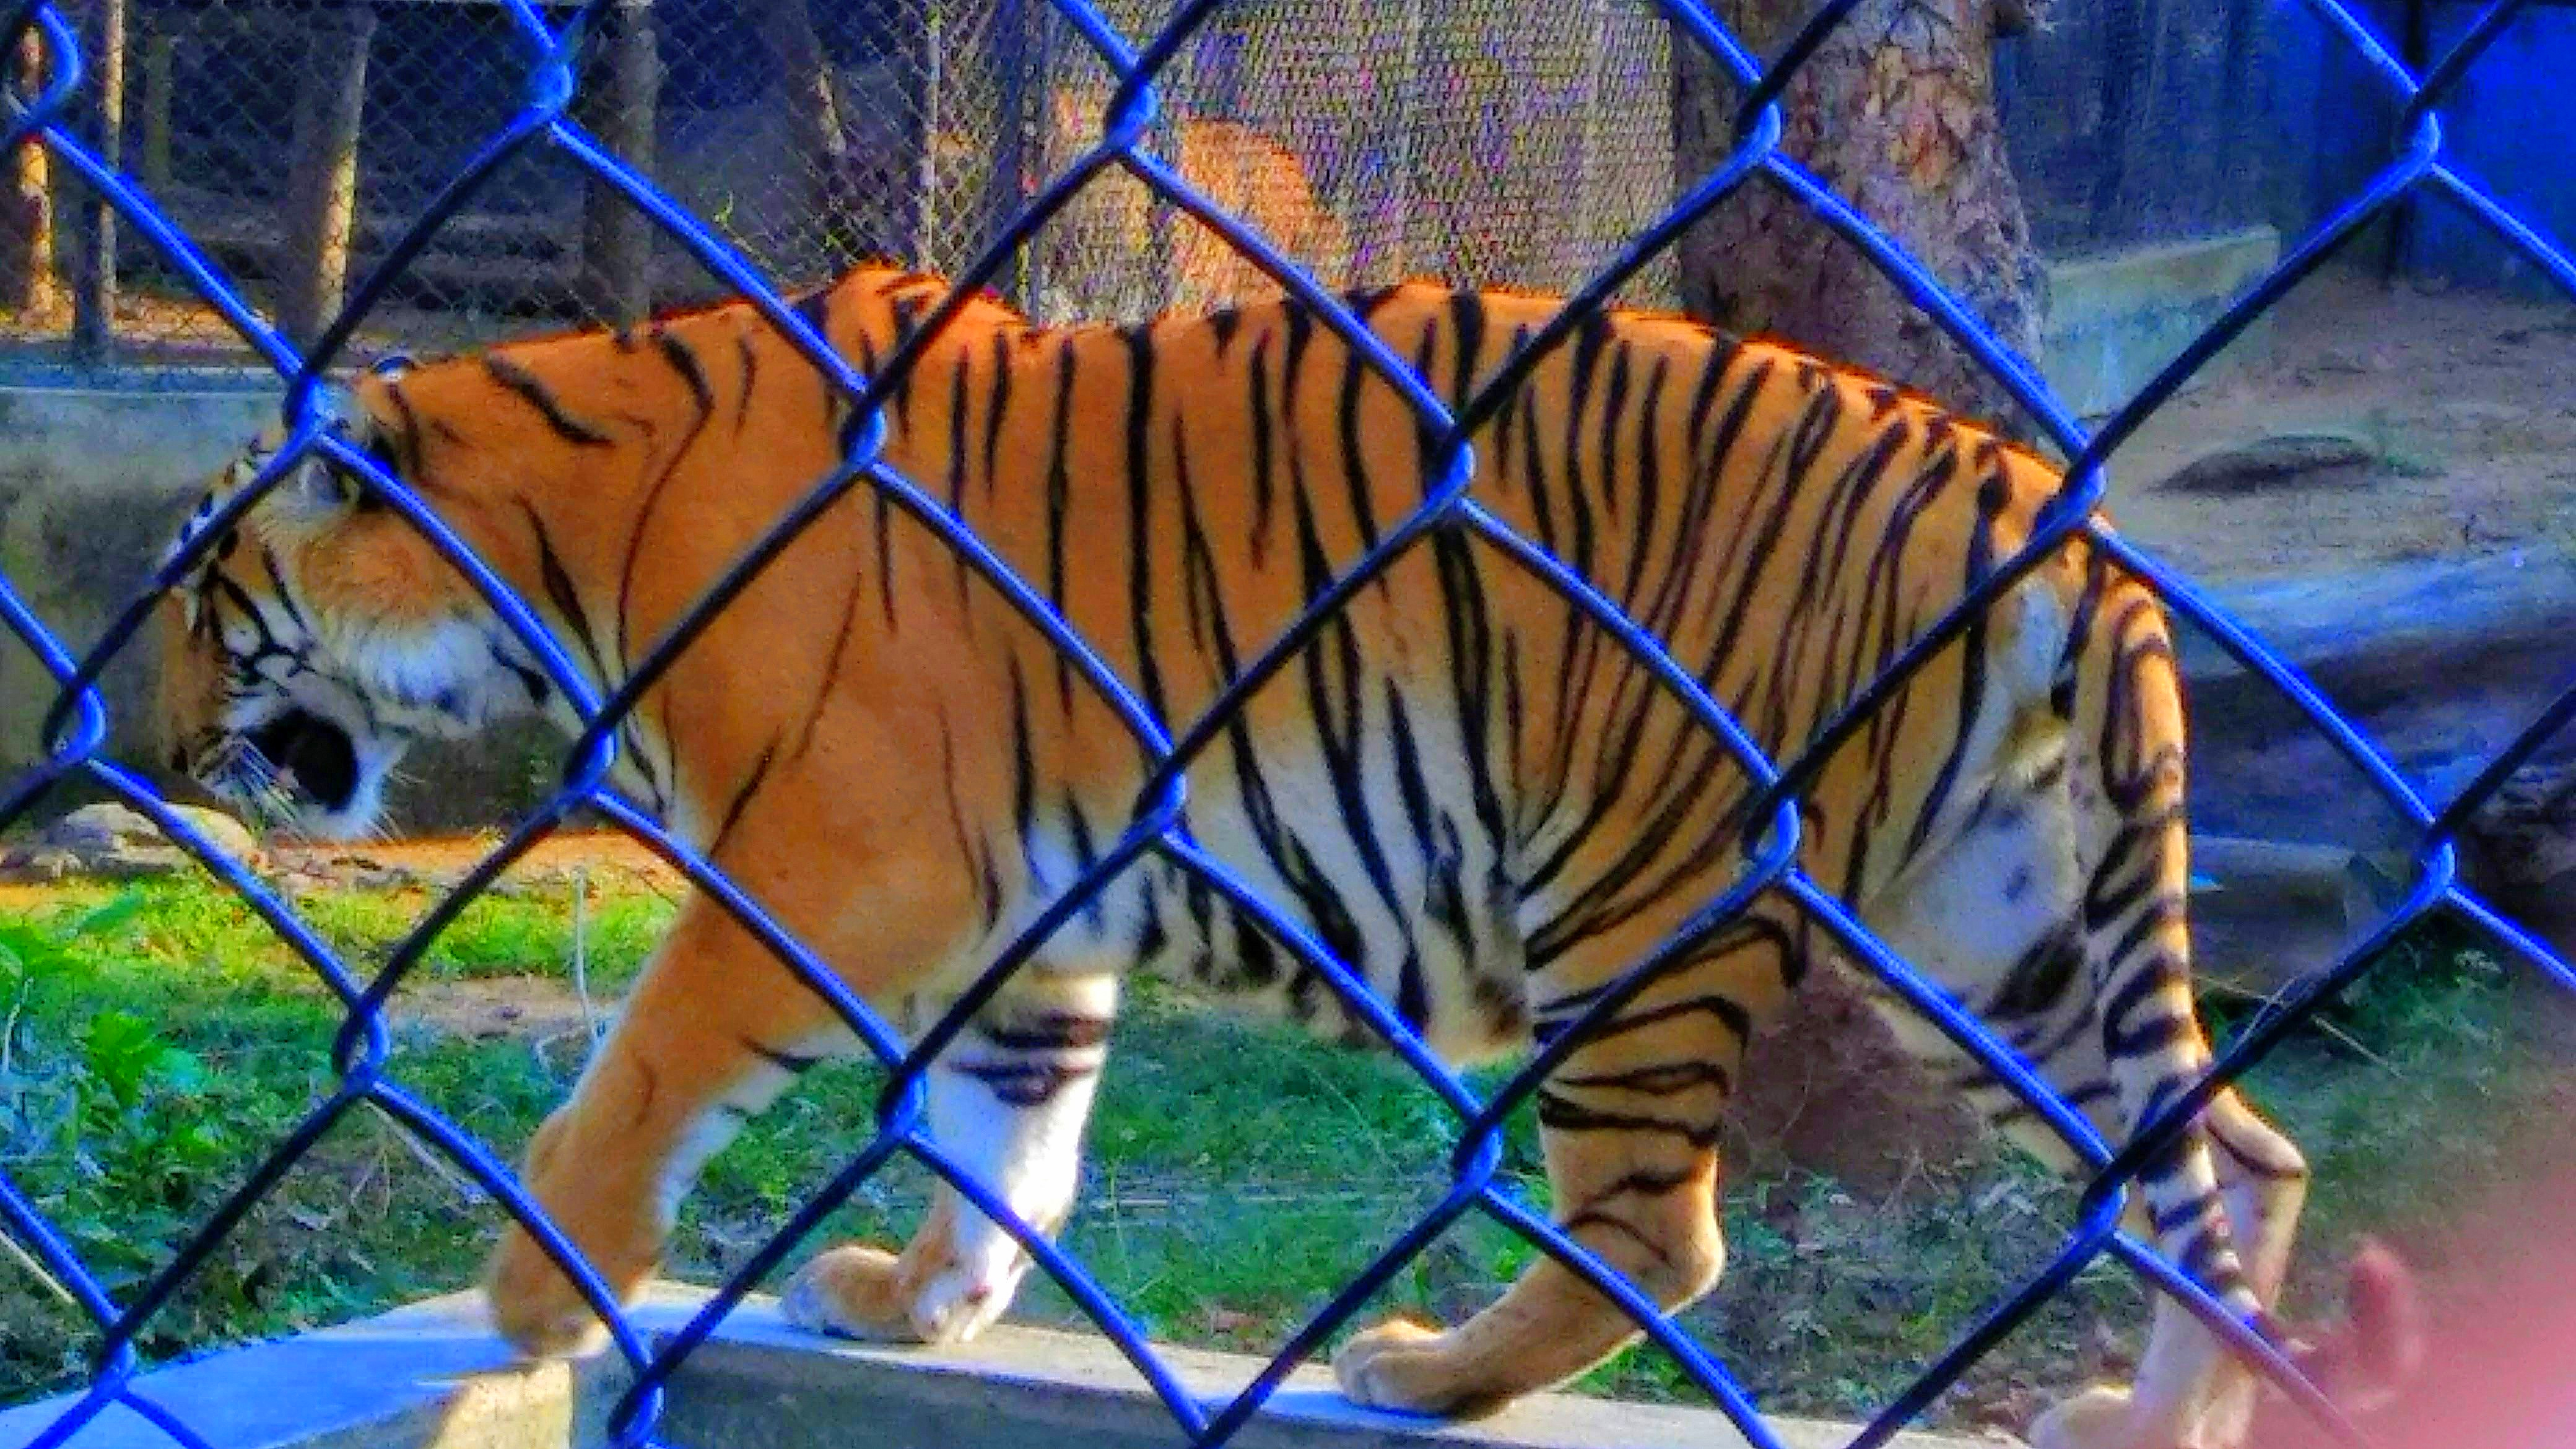 Behind Safety Lines - A view of a tiger inside a cage